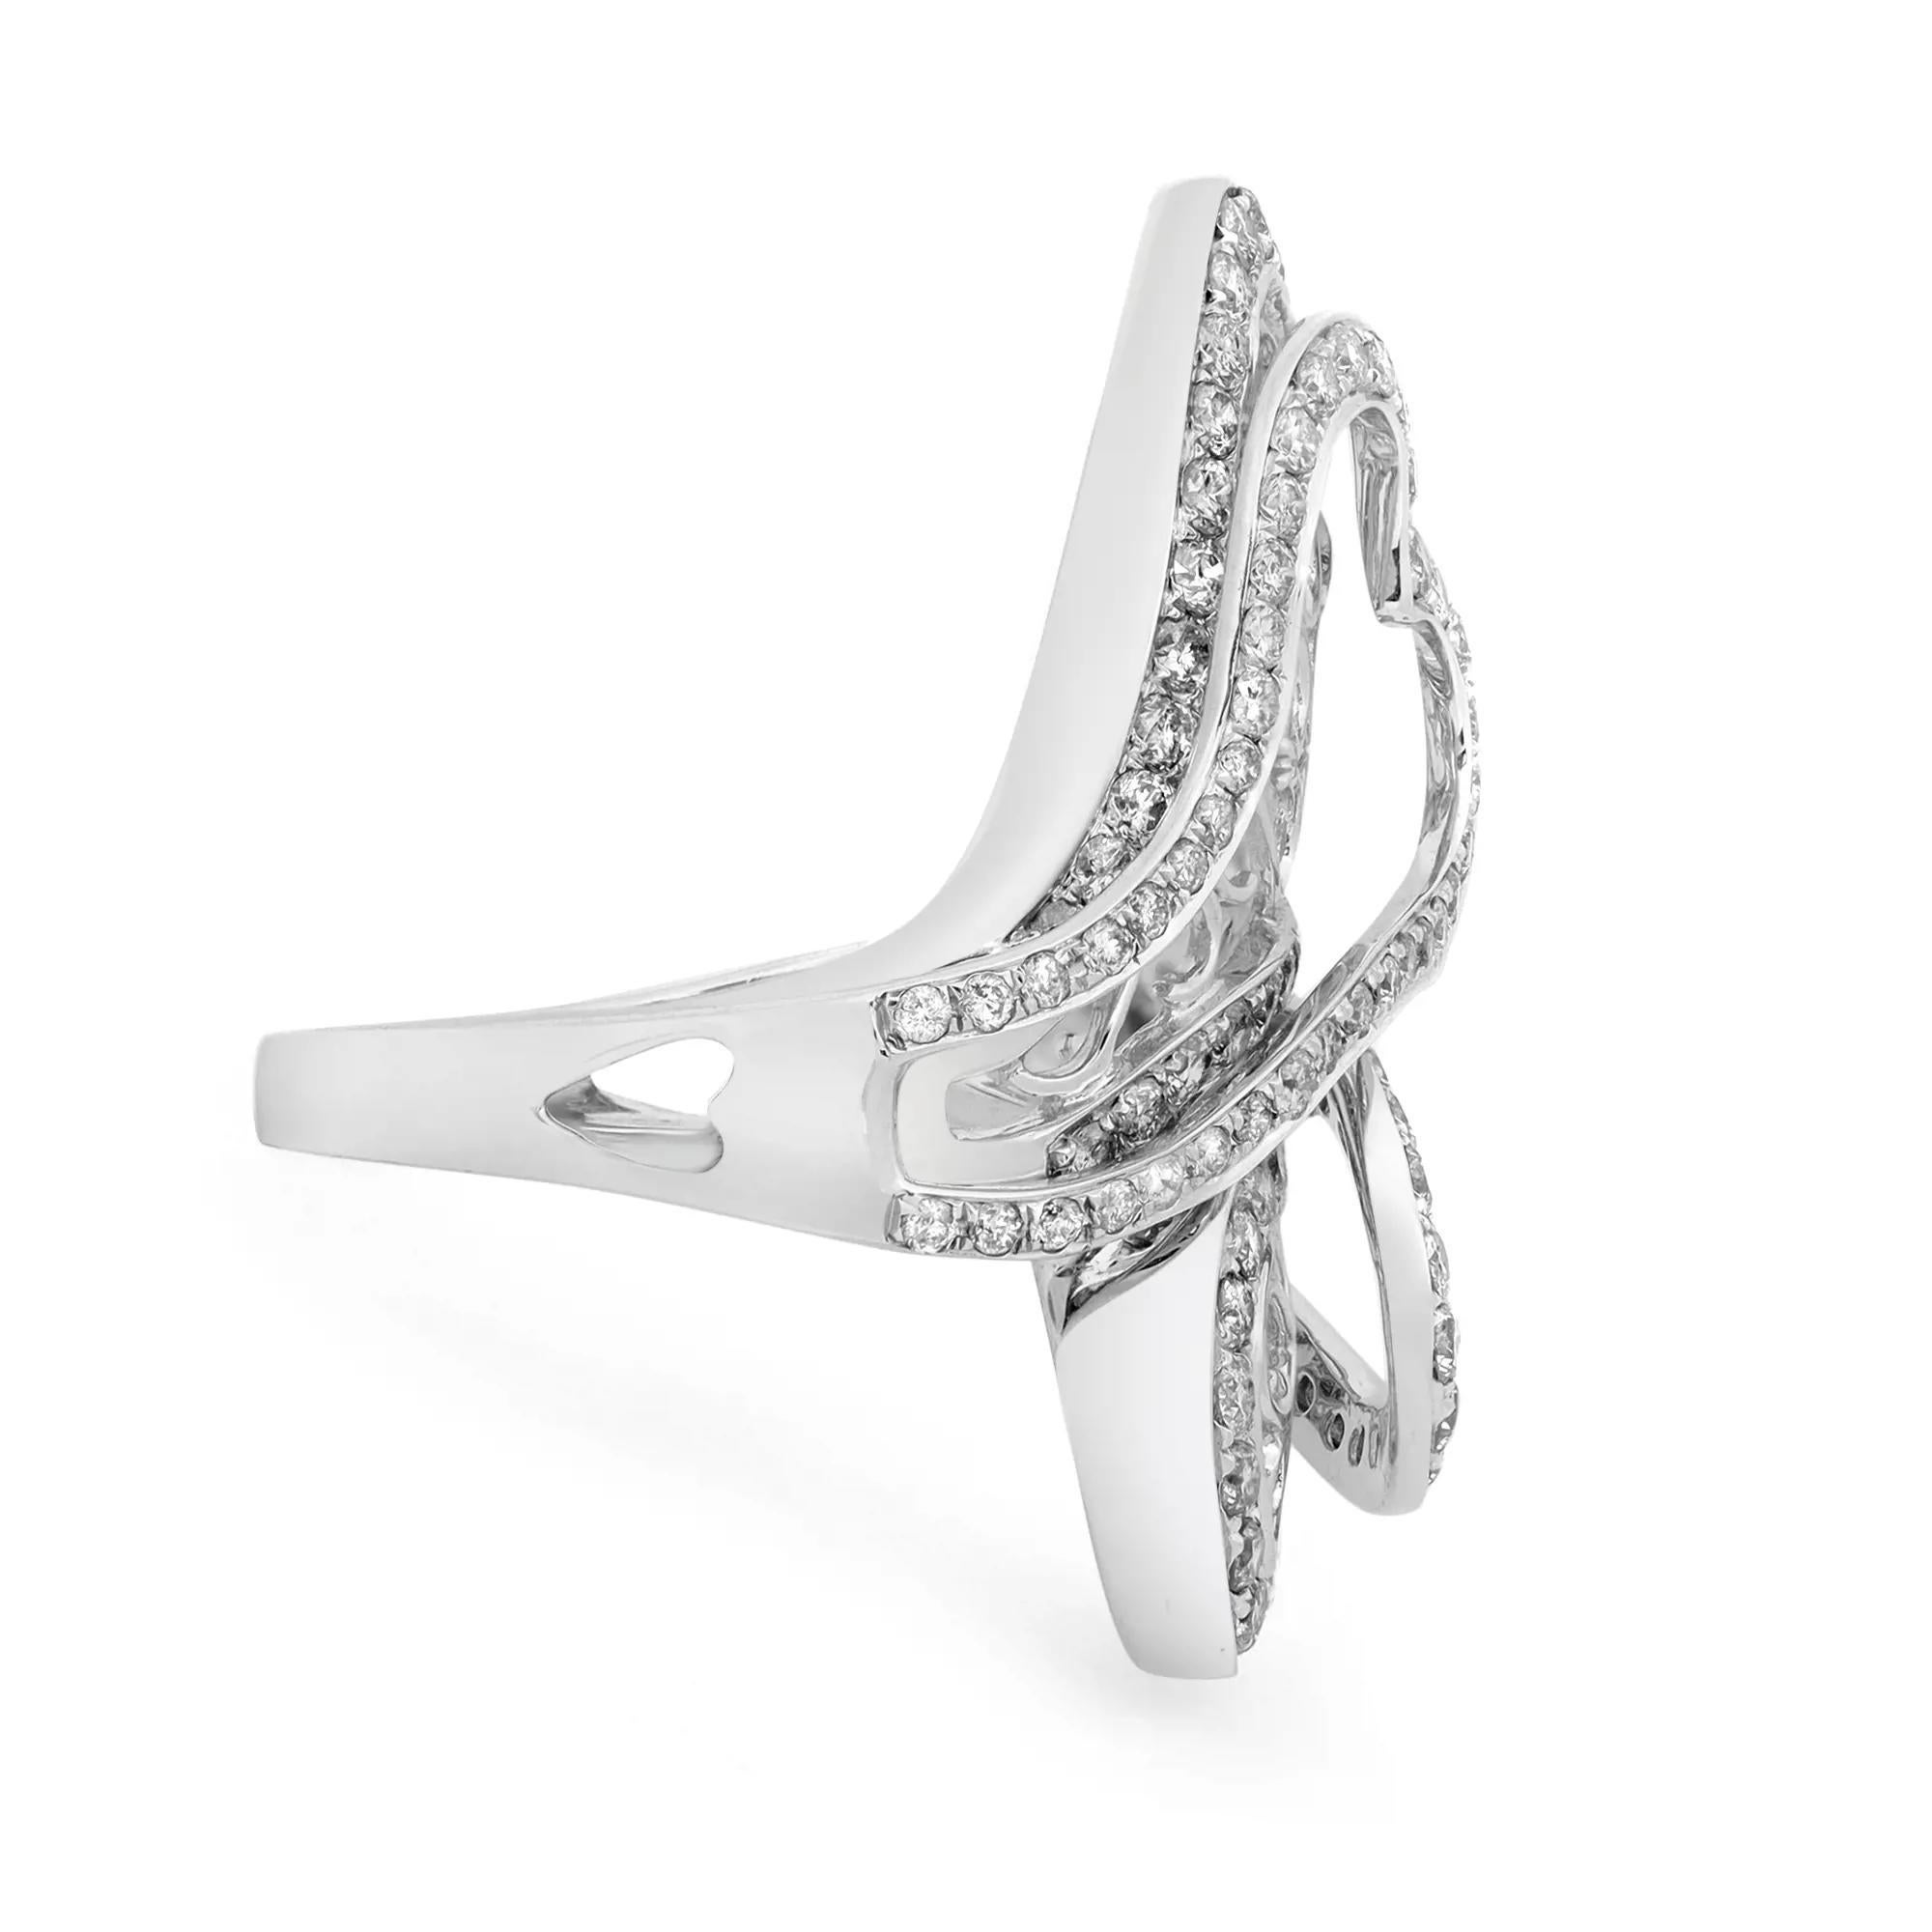 Dazzle away with this bold ladies cocktail ring. Crafted in 14k white gold. Showcasing pave set round brilliant cut diamonds with intricate filigree design weighing 2.04 carats. Diamond quality: G-H color and SI1 clarity. Ring size: 7.5. Total